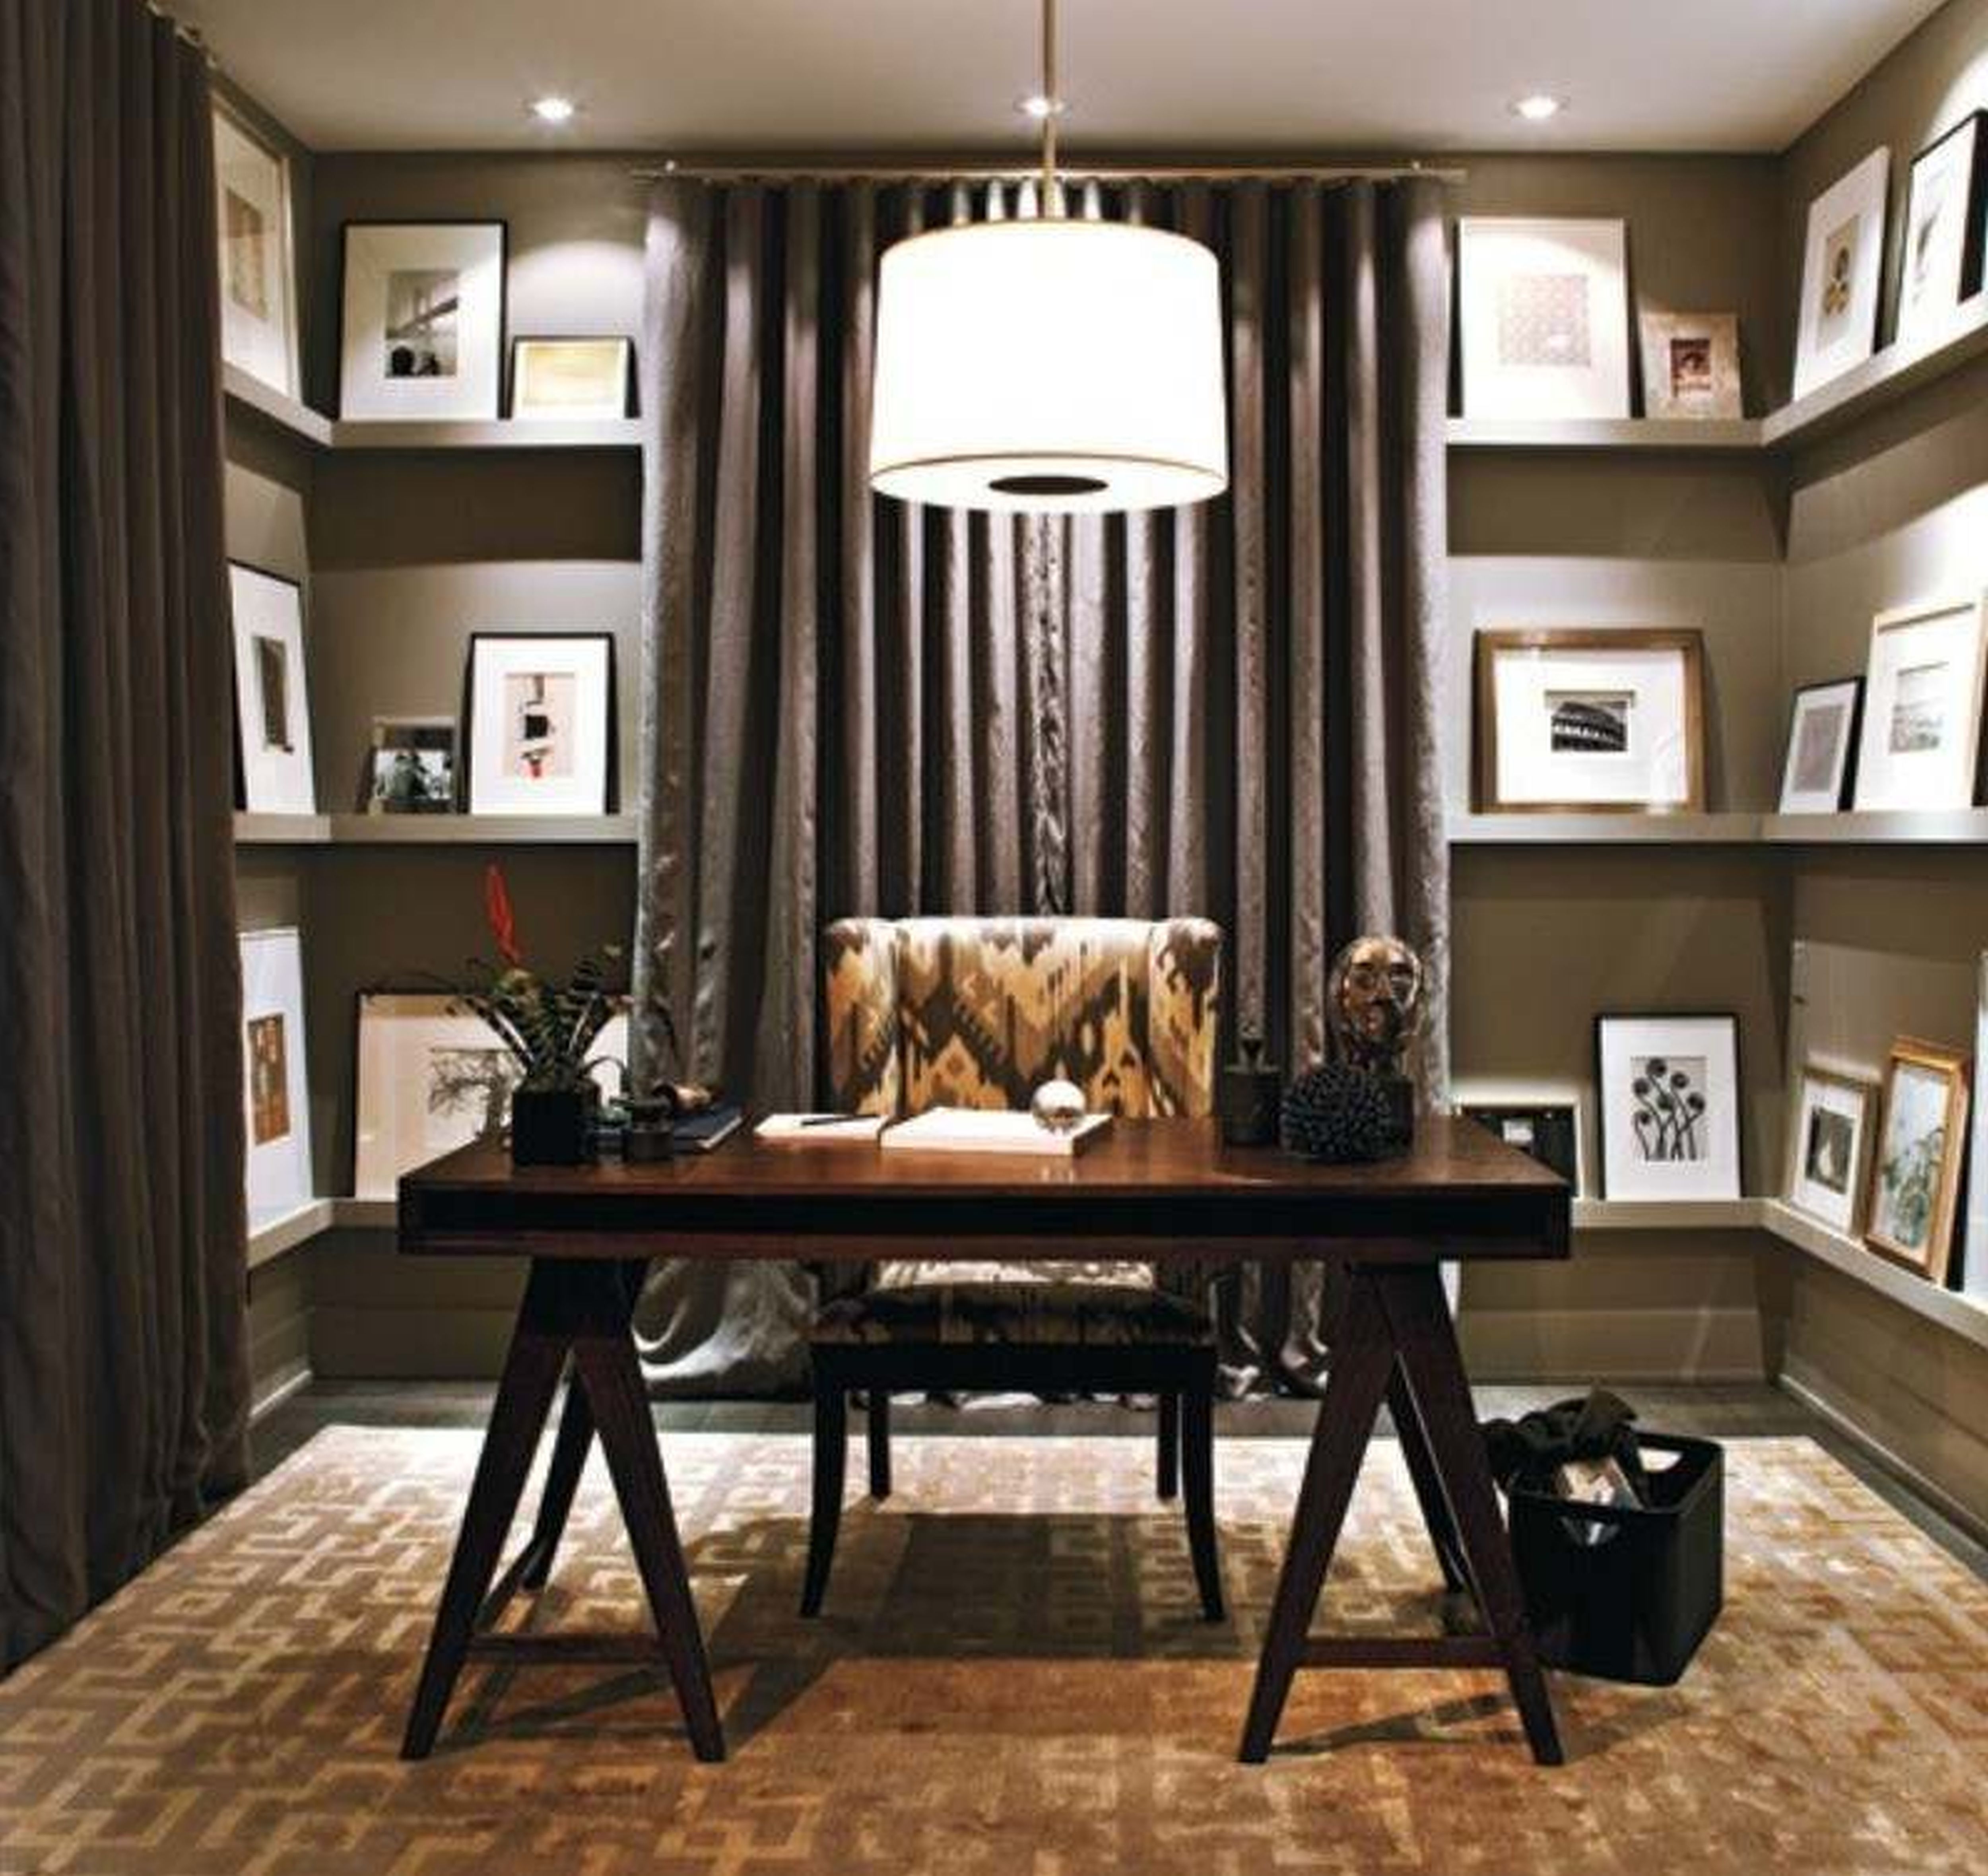 Furnishing Ideas for Home Office